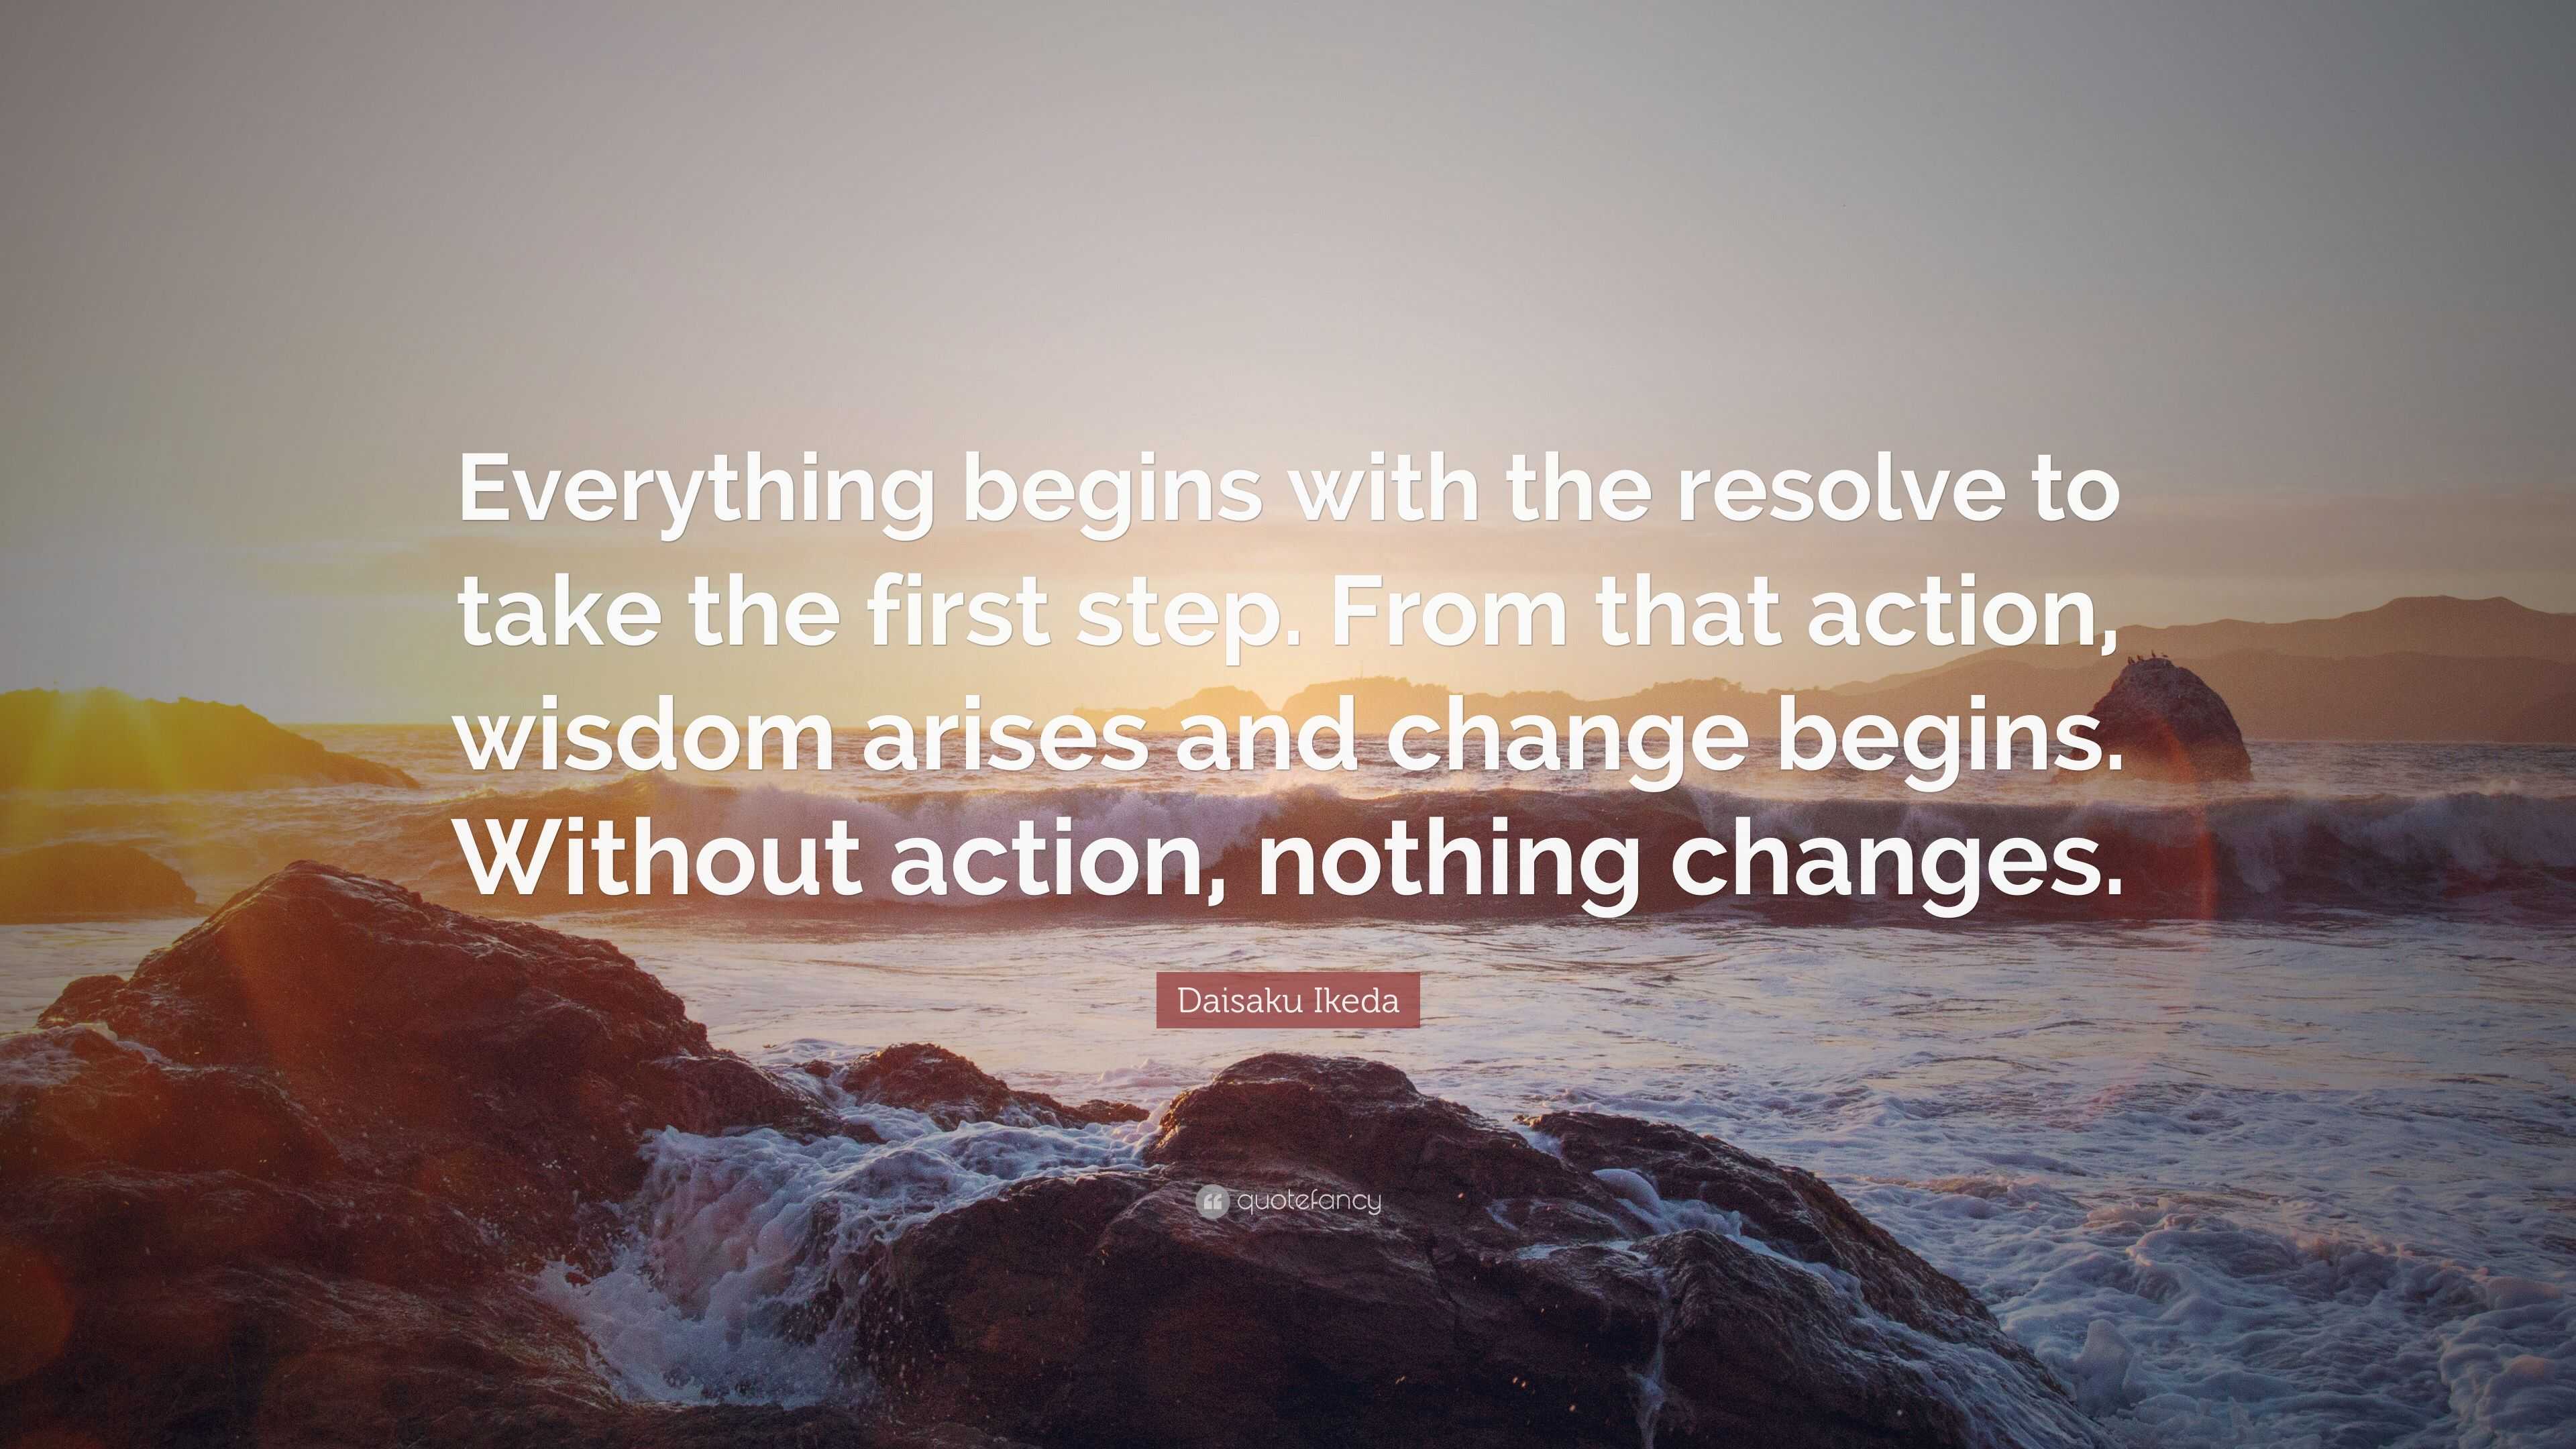 Daisaku Ikeda Quote: “Everything begins with the resolve to take the ...